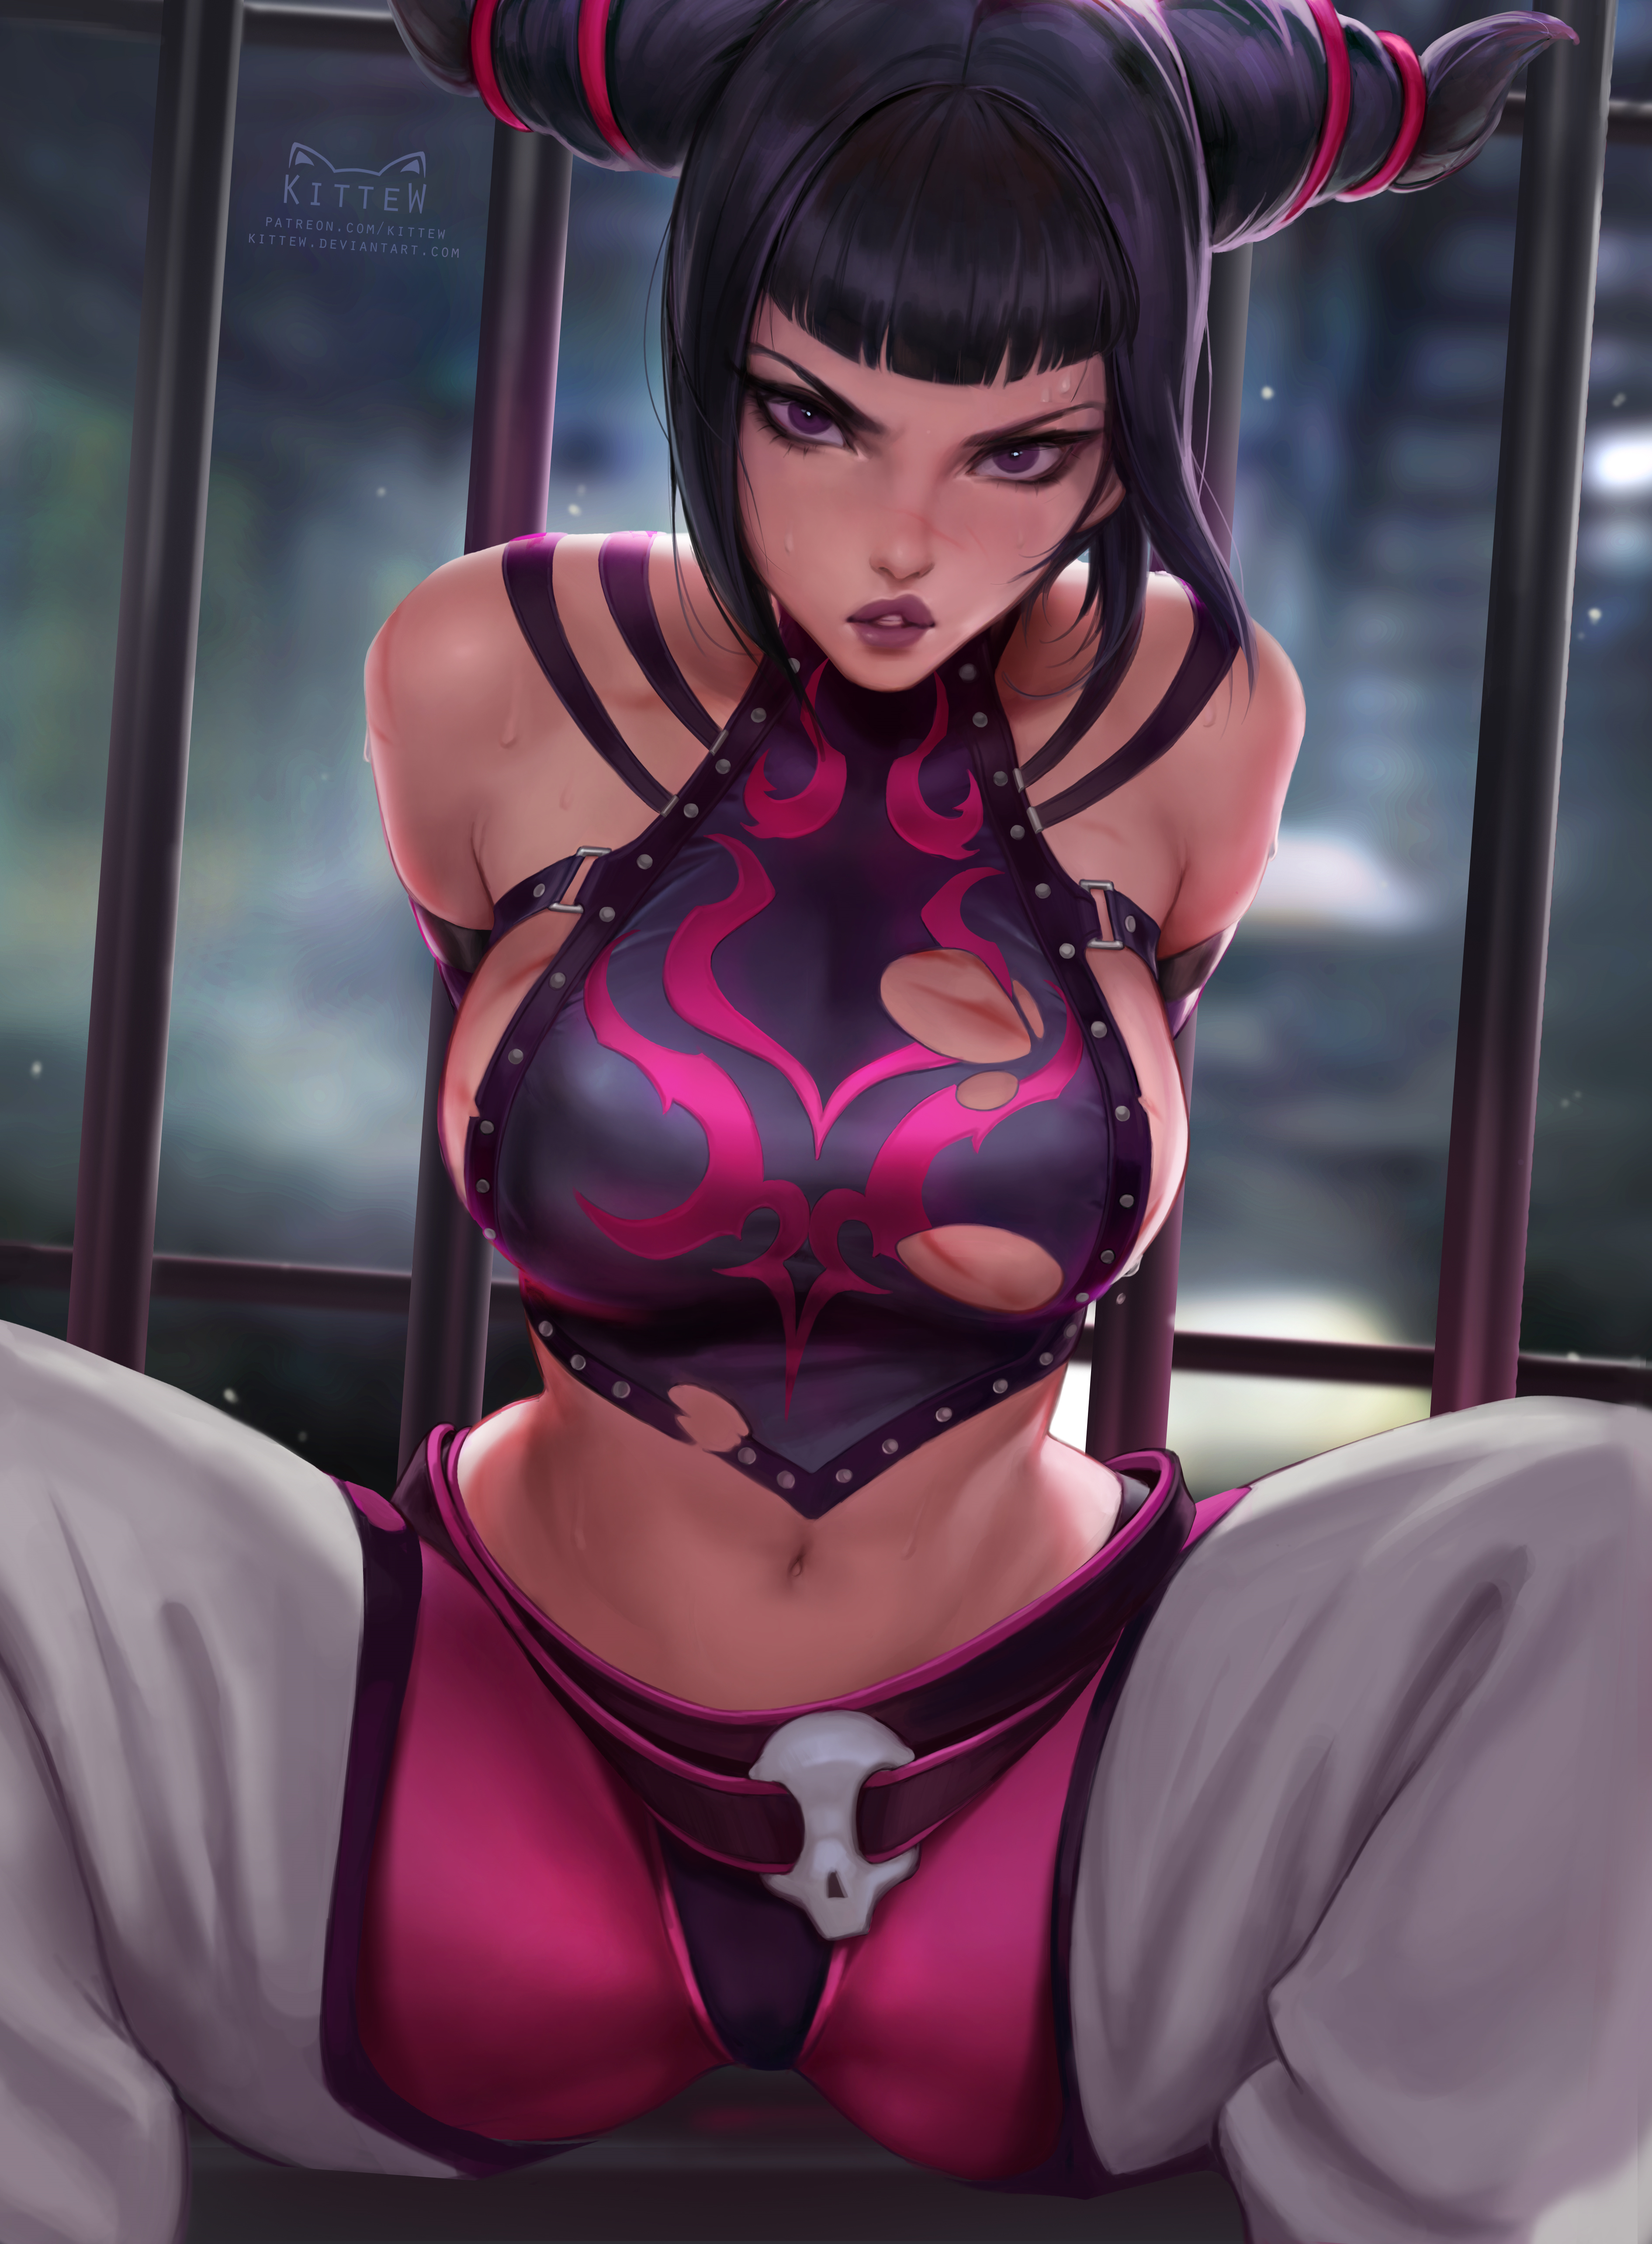 General 3781x5136 Street Fighter video games video game girls crop top torn clothes belly looking at viewer angry bangs purple eyes thick thigh portrait display artwork drawing illustration 2D fan art Kittew video game warriors boobs big boobs dark hair Han Juri